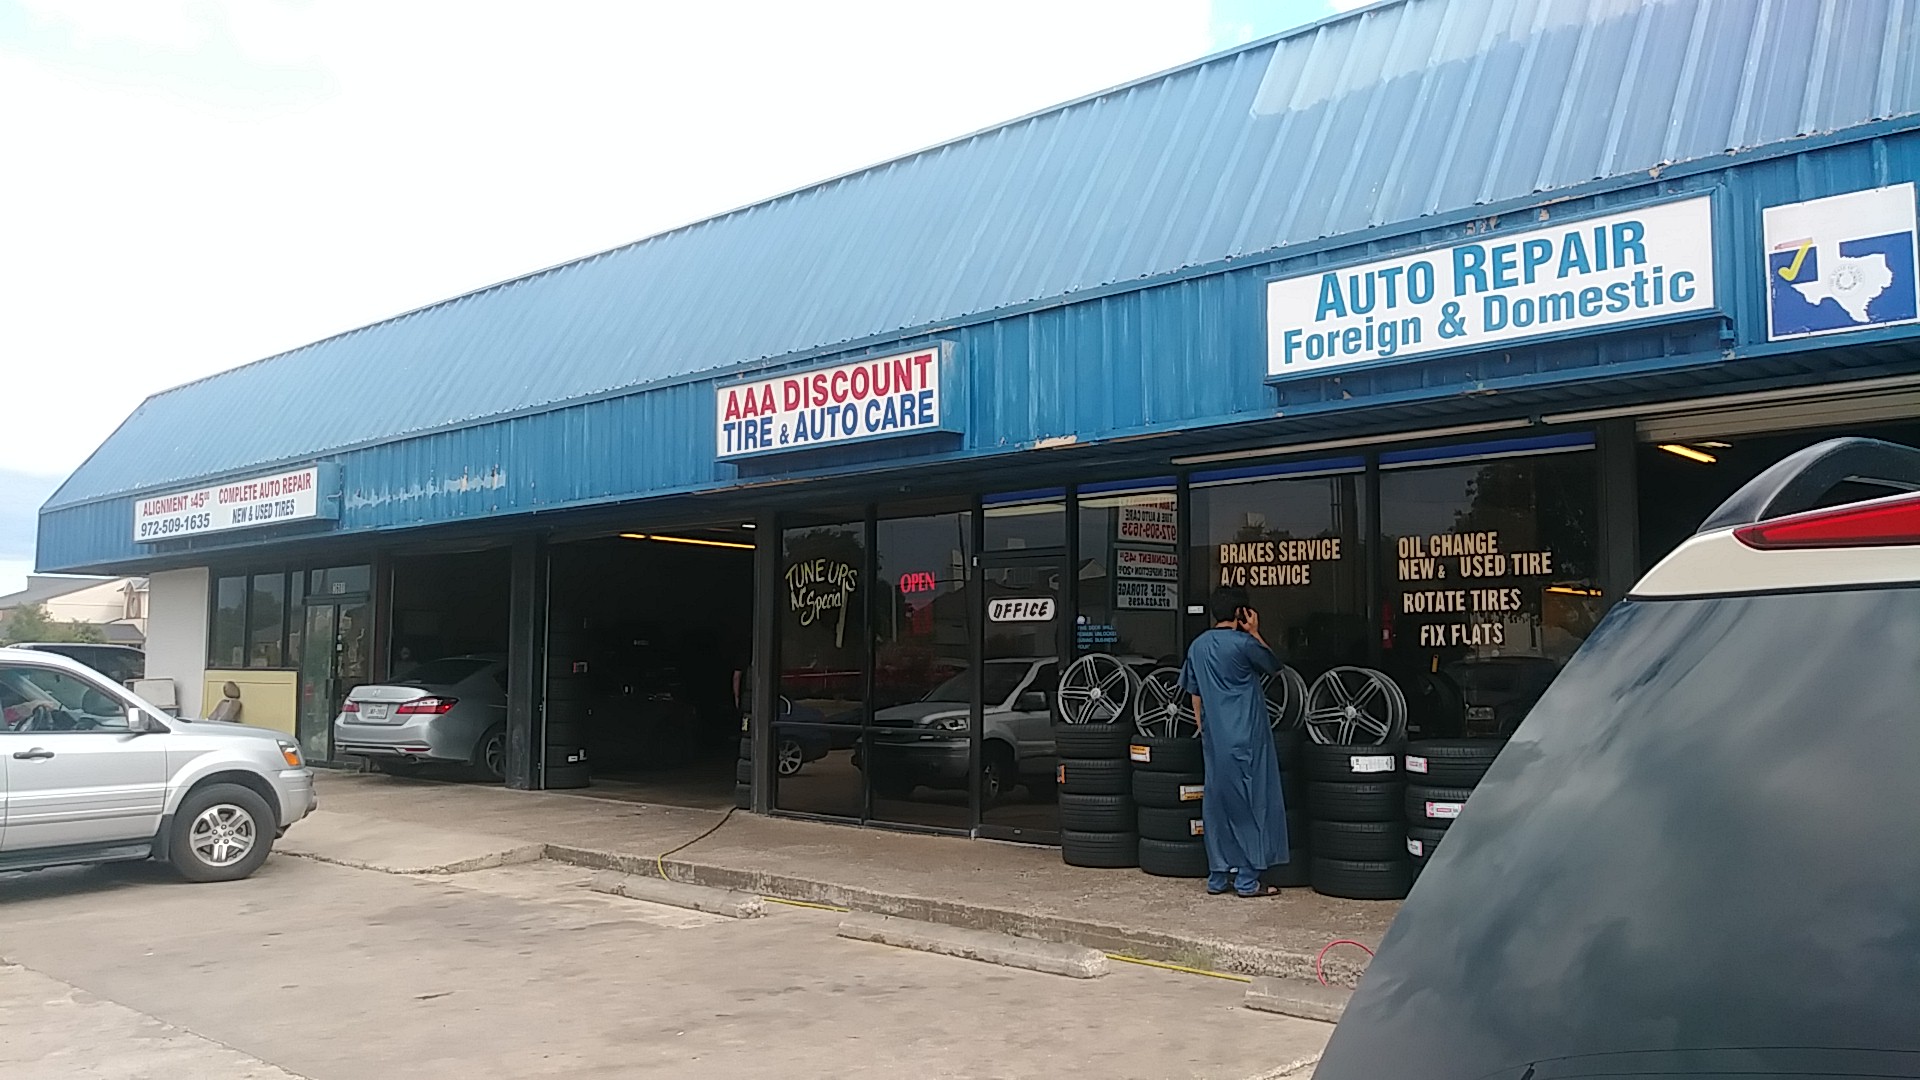 AAA Discount Tire & Auto Care